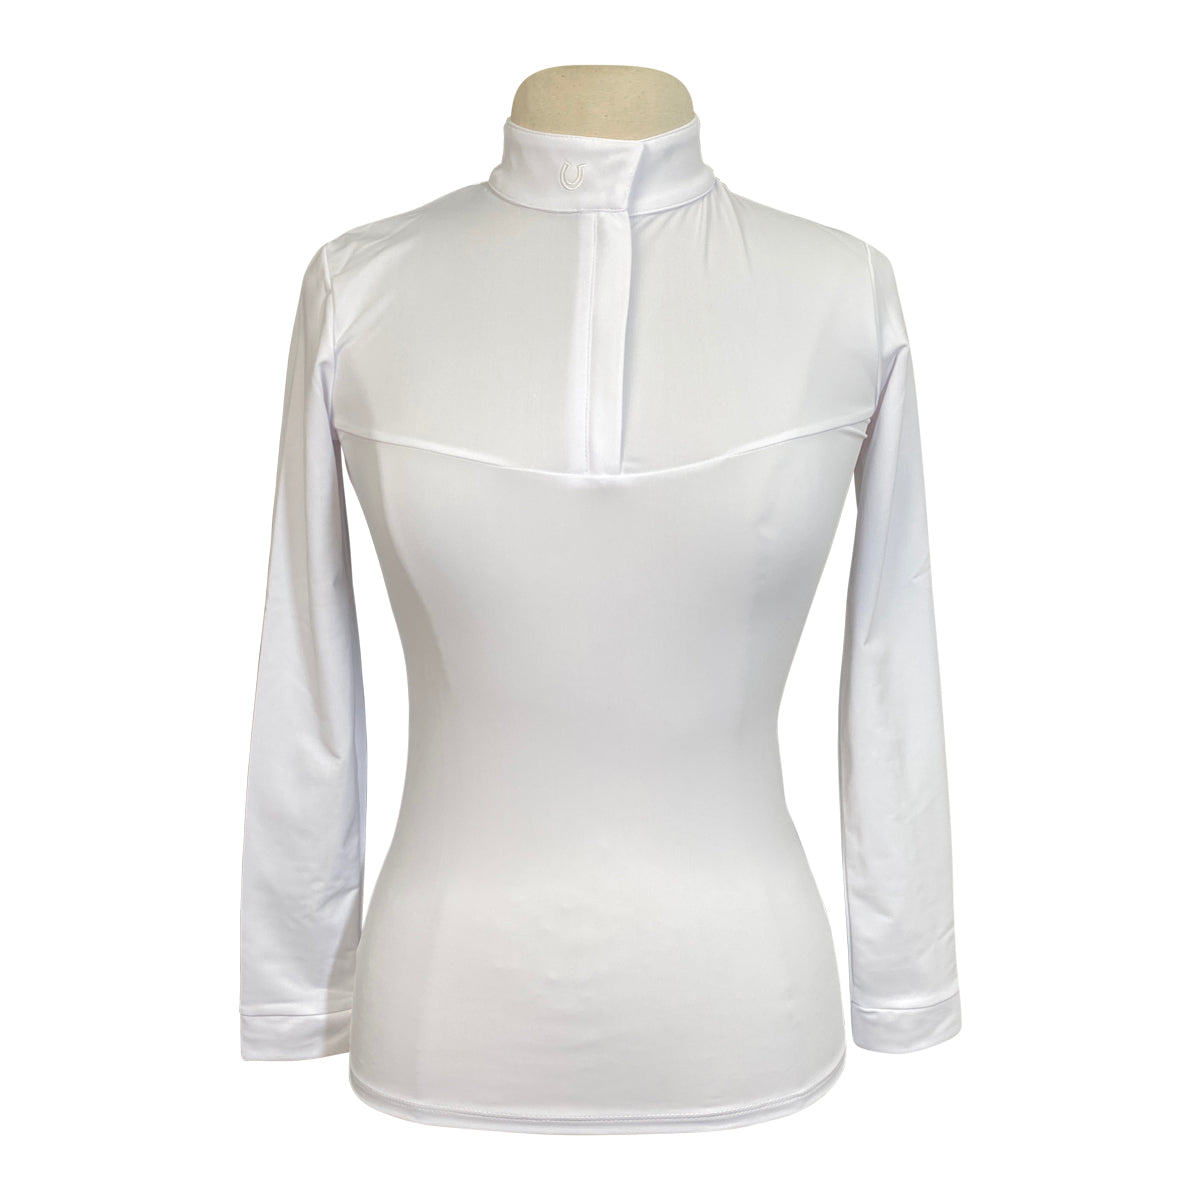 FitEq 'Bryce' Long Sleeve Show Shirt in White 